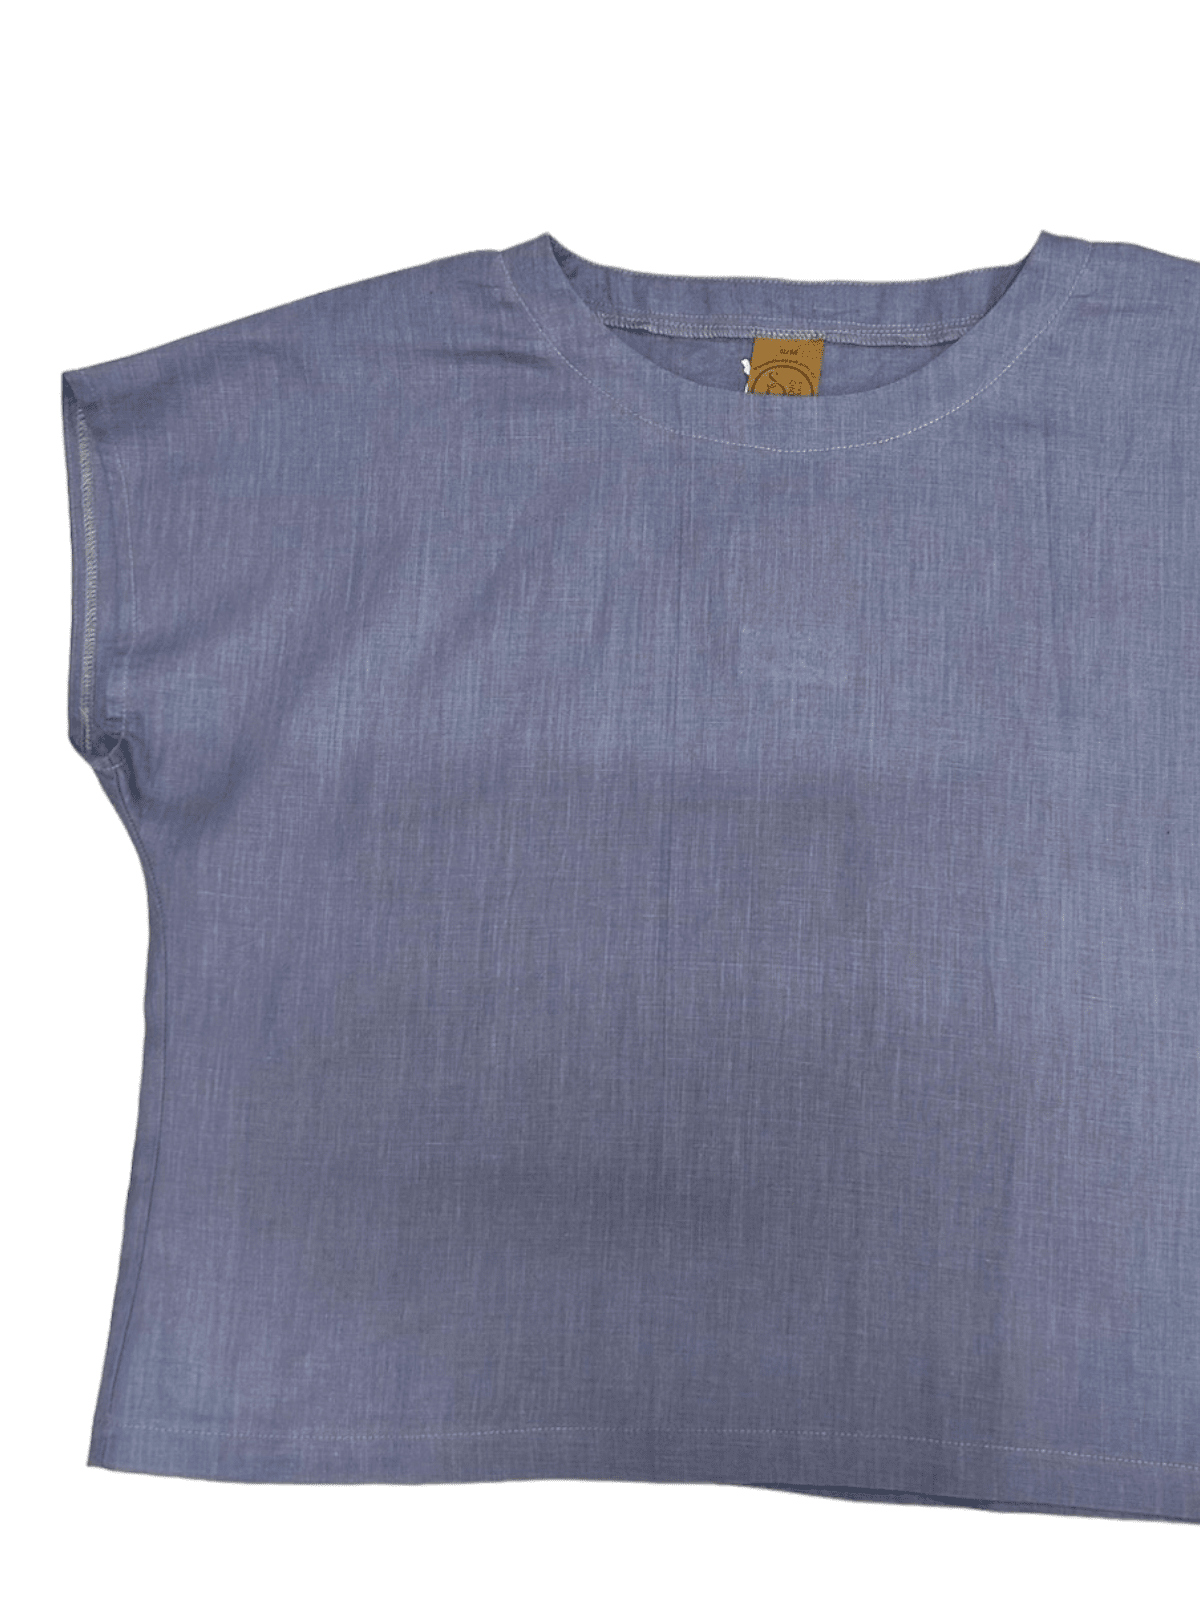 Washed Linen Shell Top - Dove Shirts & Tops The Spotted Quoll 